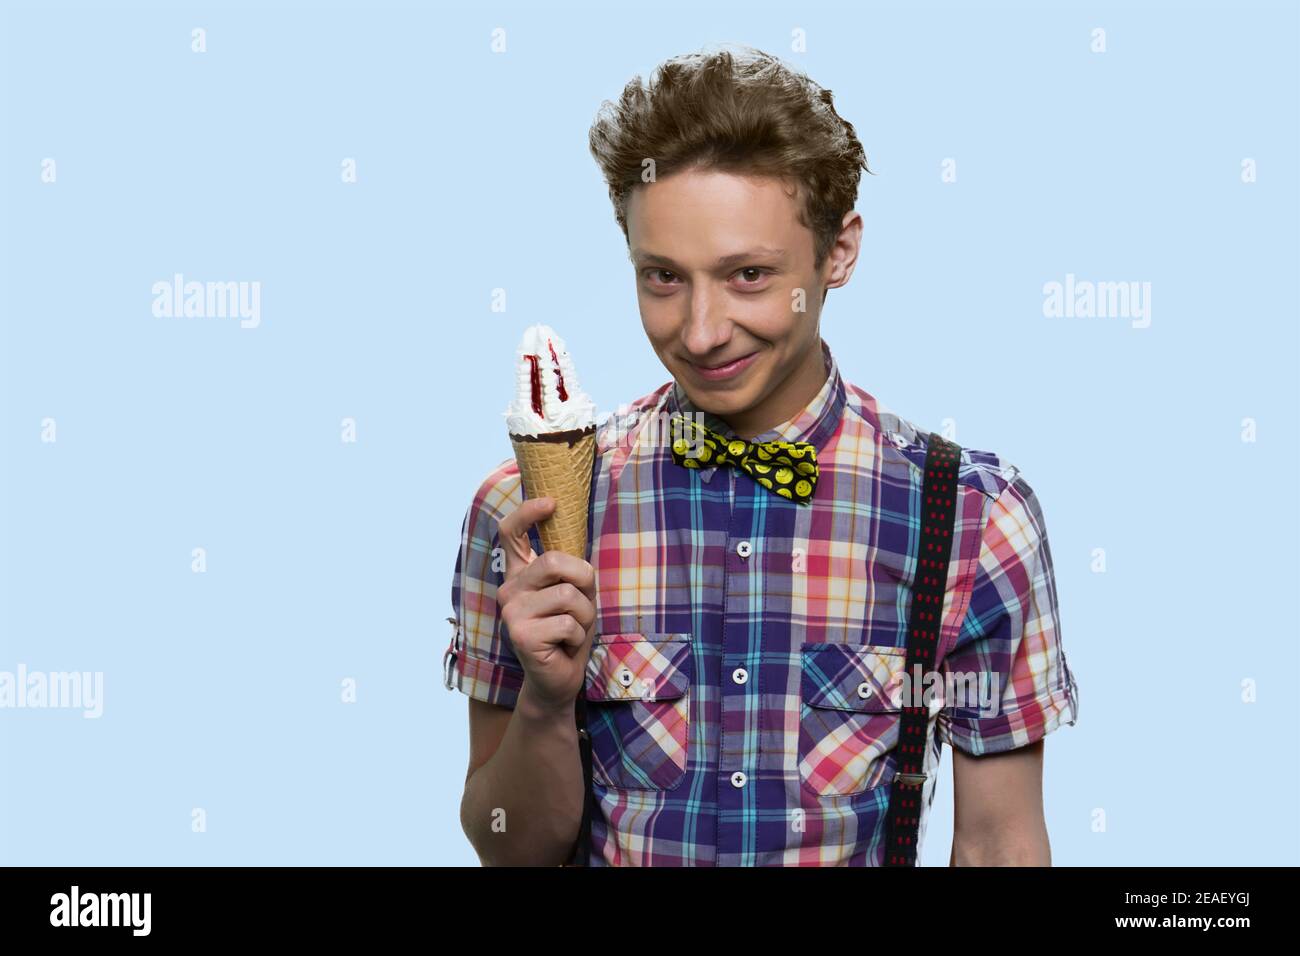 Smiling schoolboy is holding an tasty icecream. Stock Photo